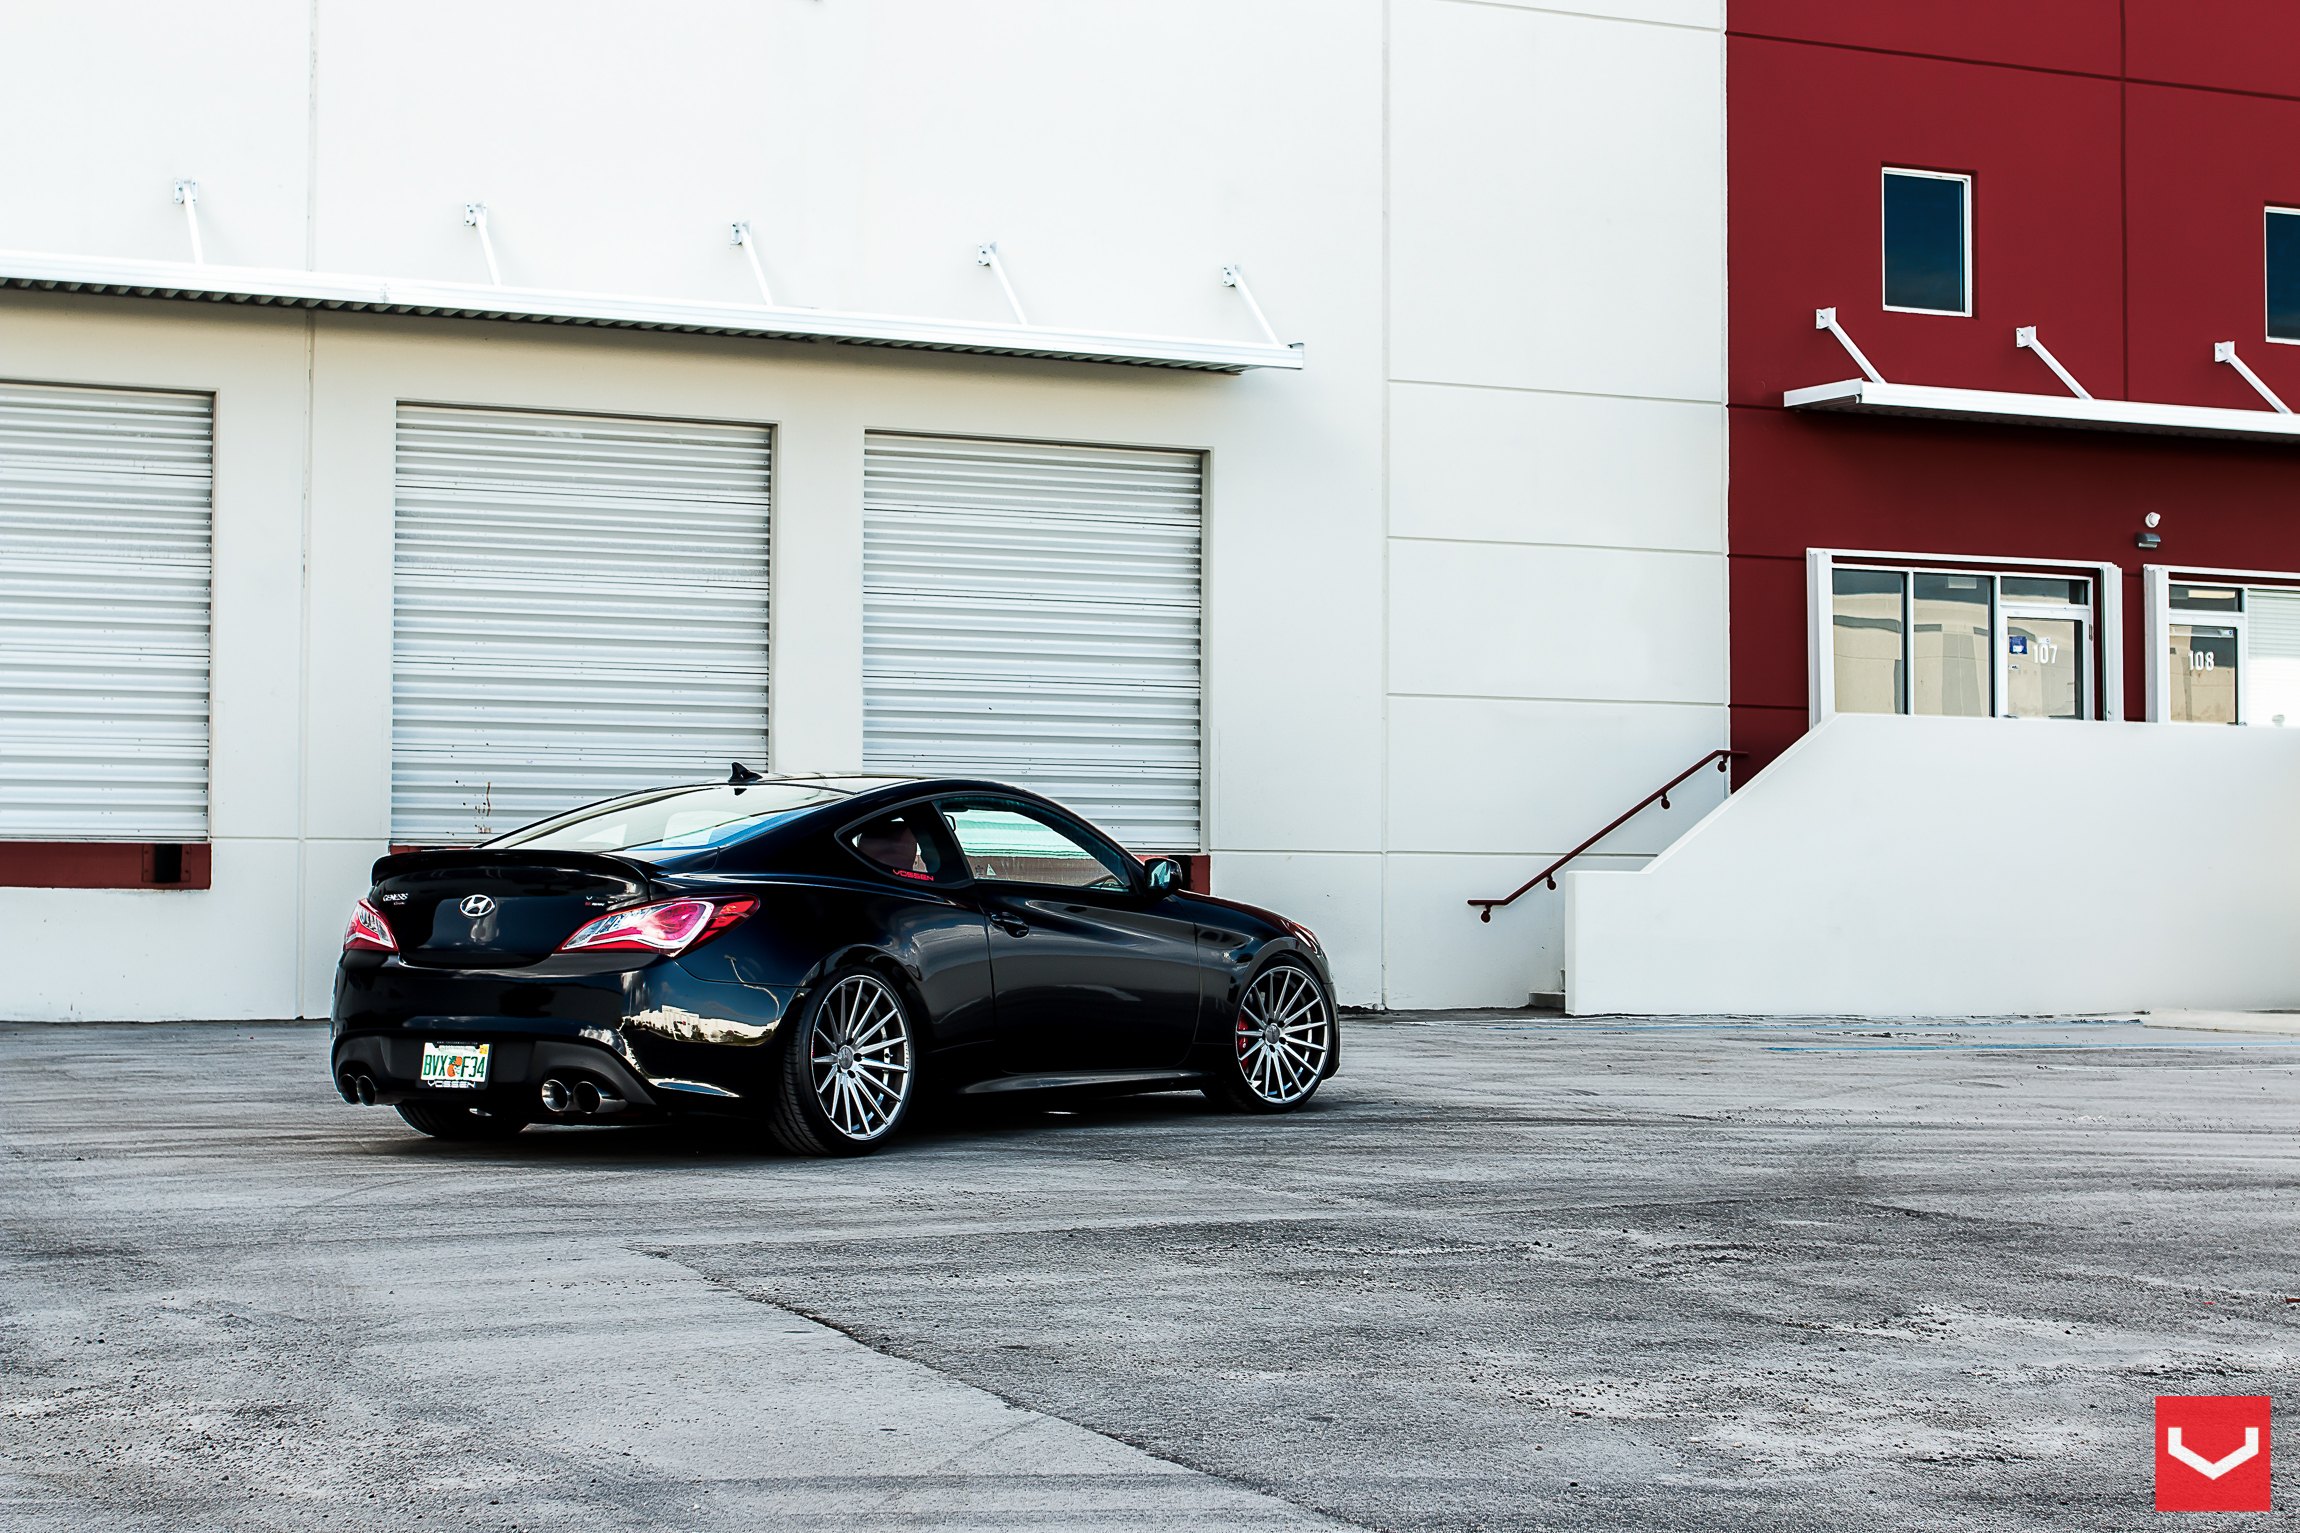 Aftermarket Rear Spoiler on Black Hyundai Genesis Coupe - Photo by Vossen